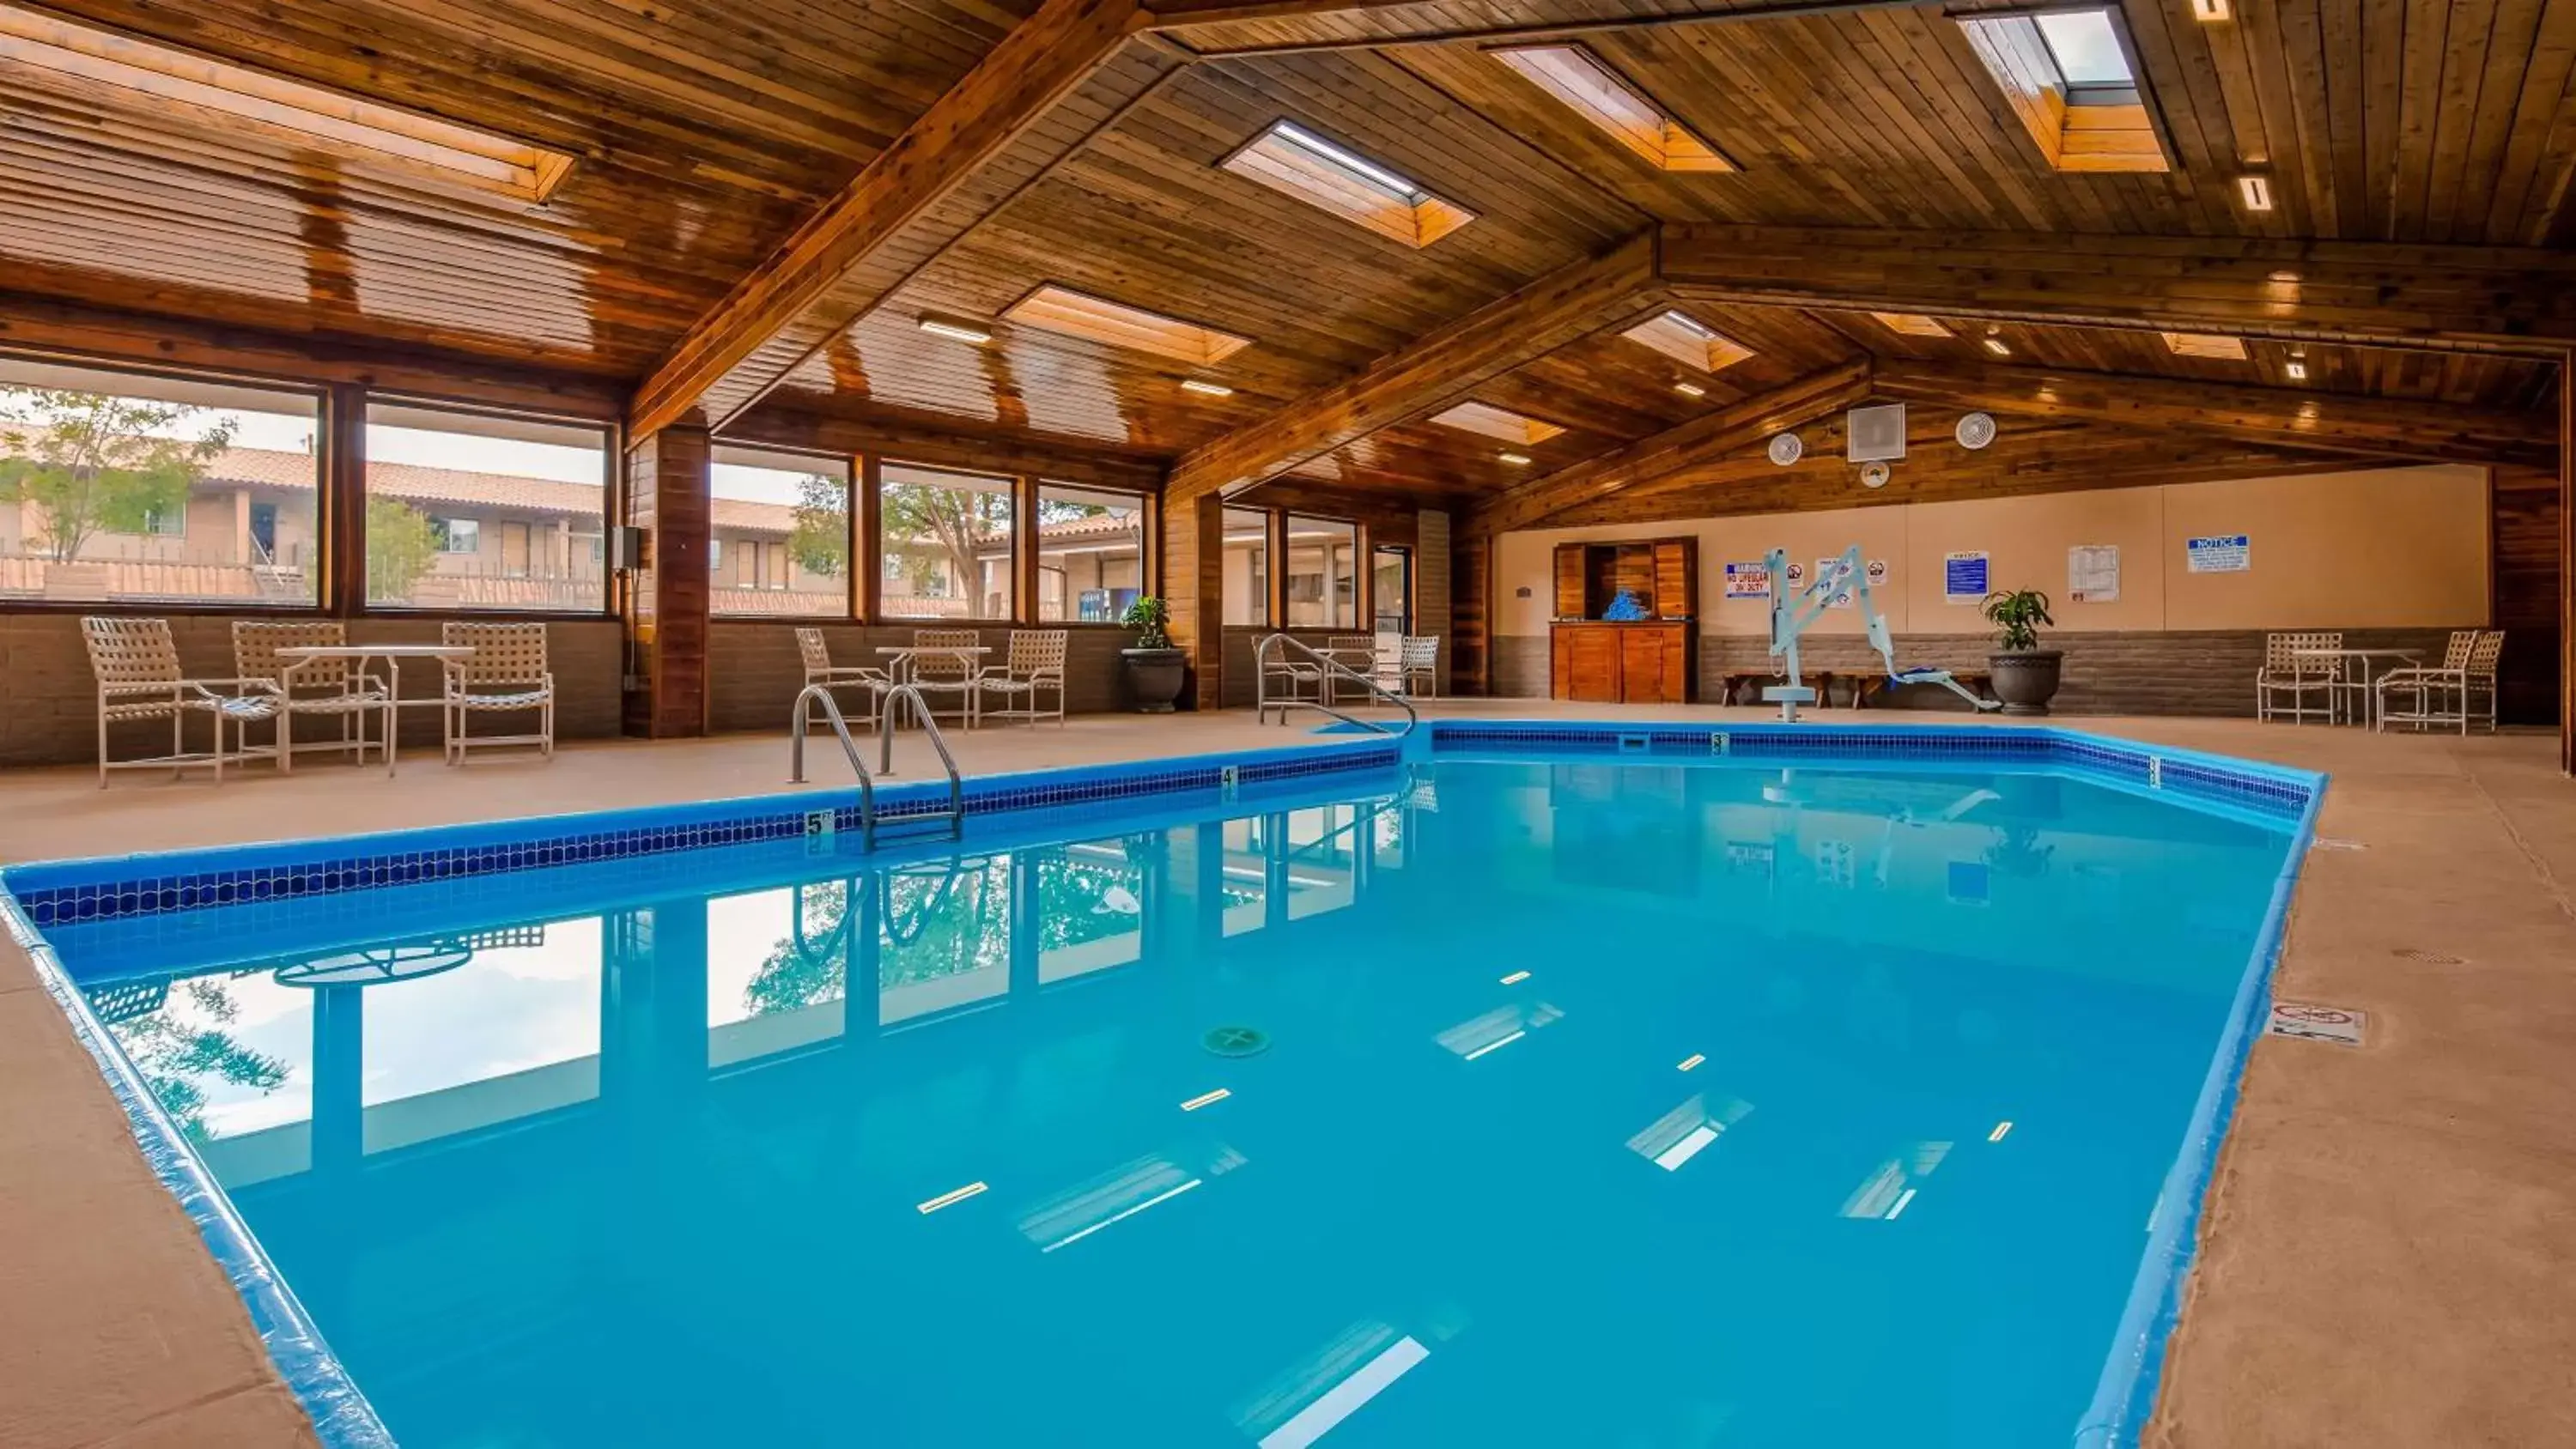 On site, Swimming Pool in Best Western Canyon De Chelly Inn